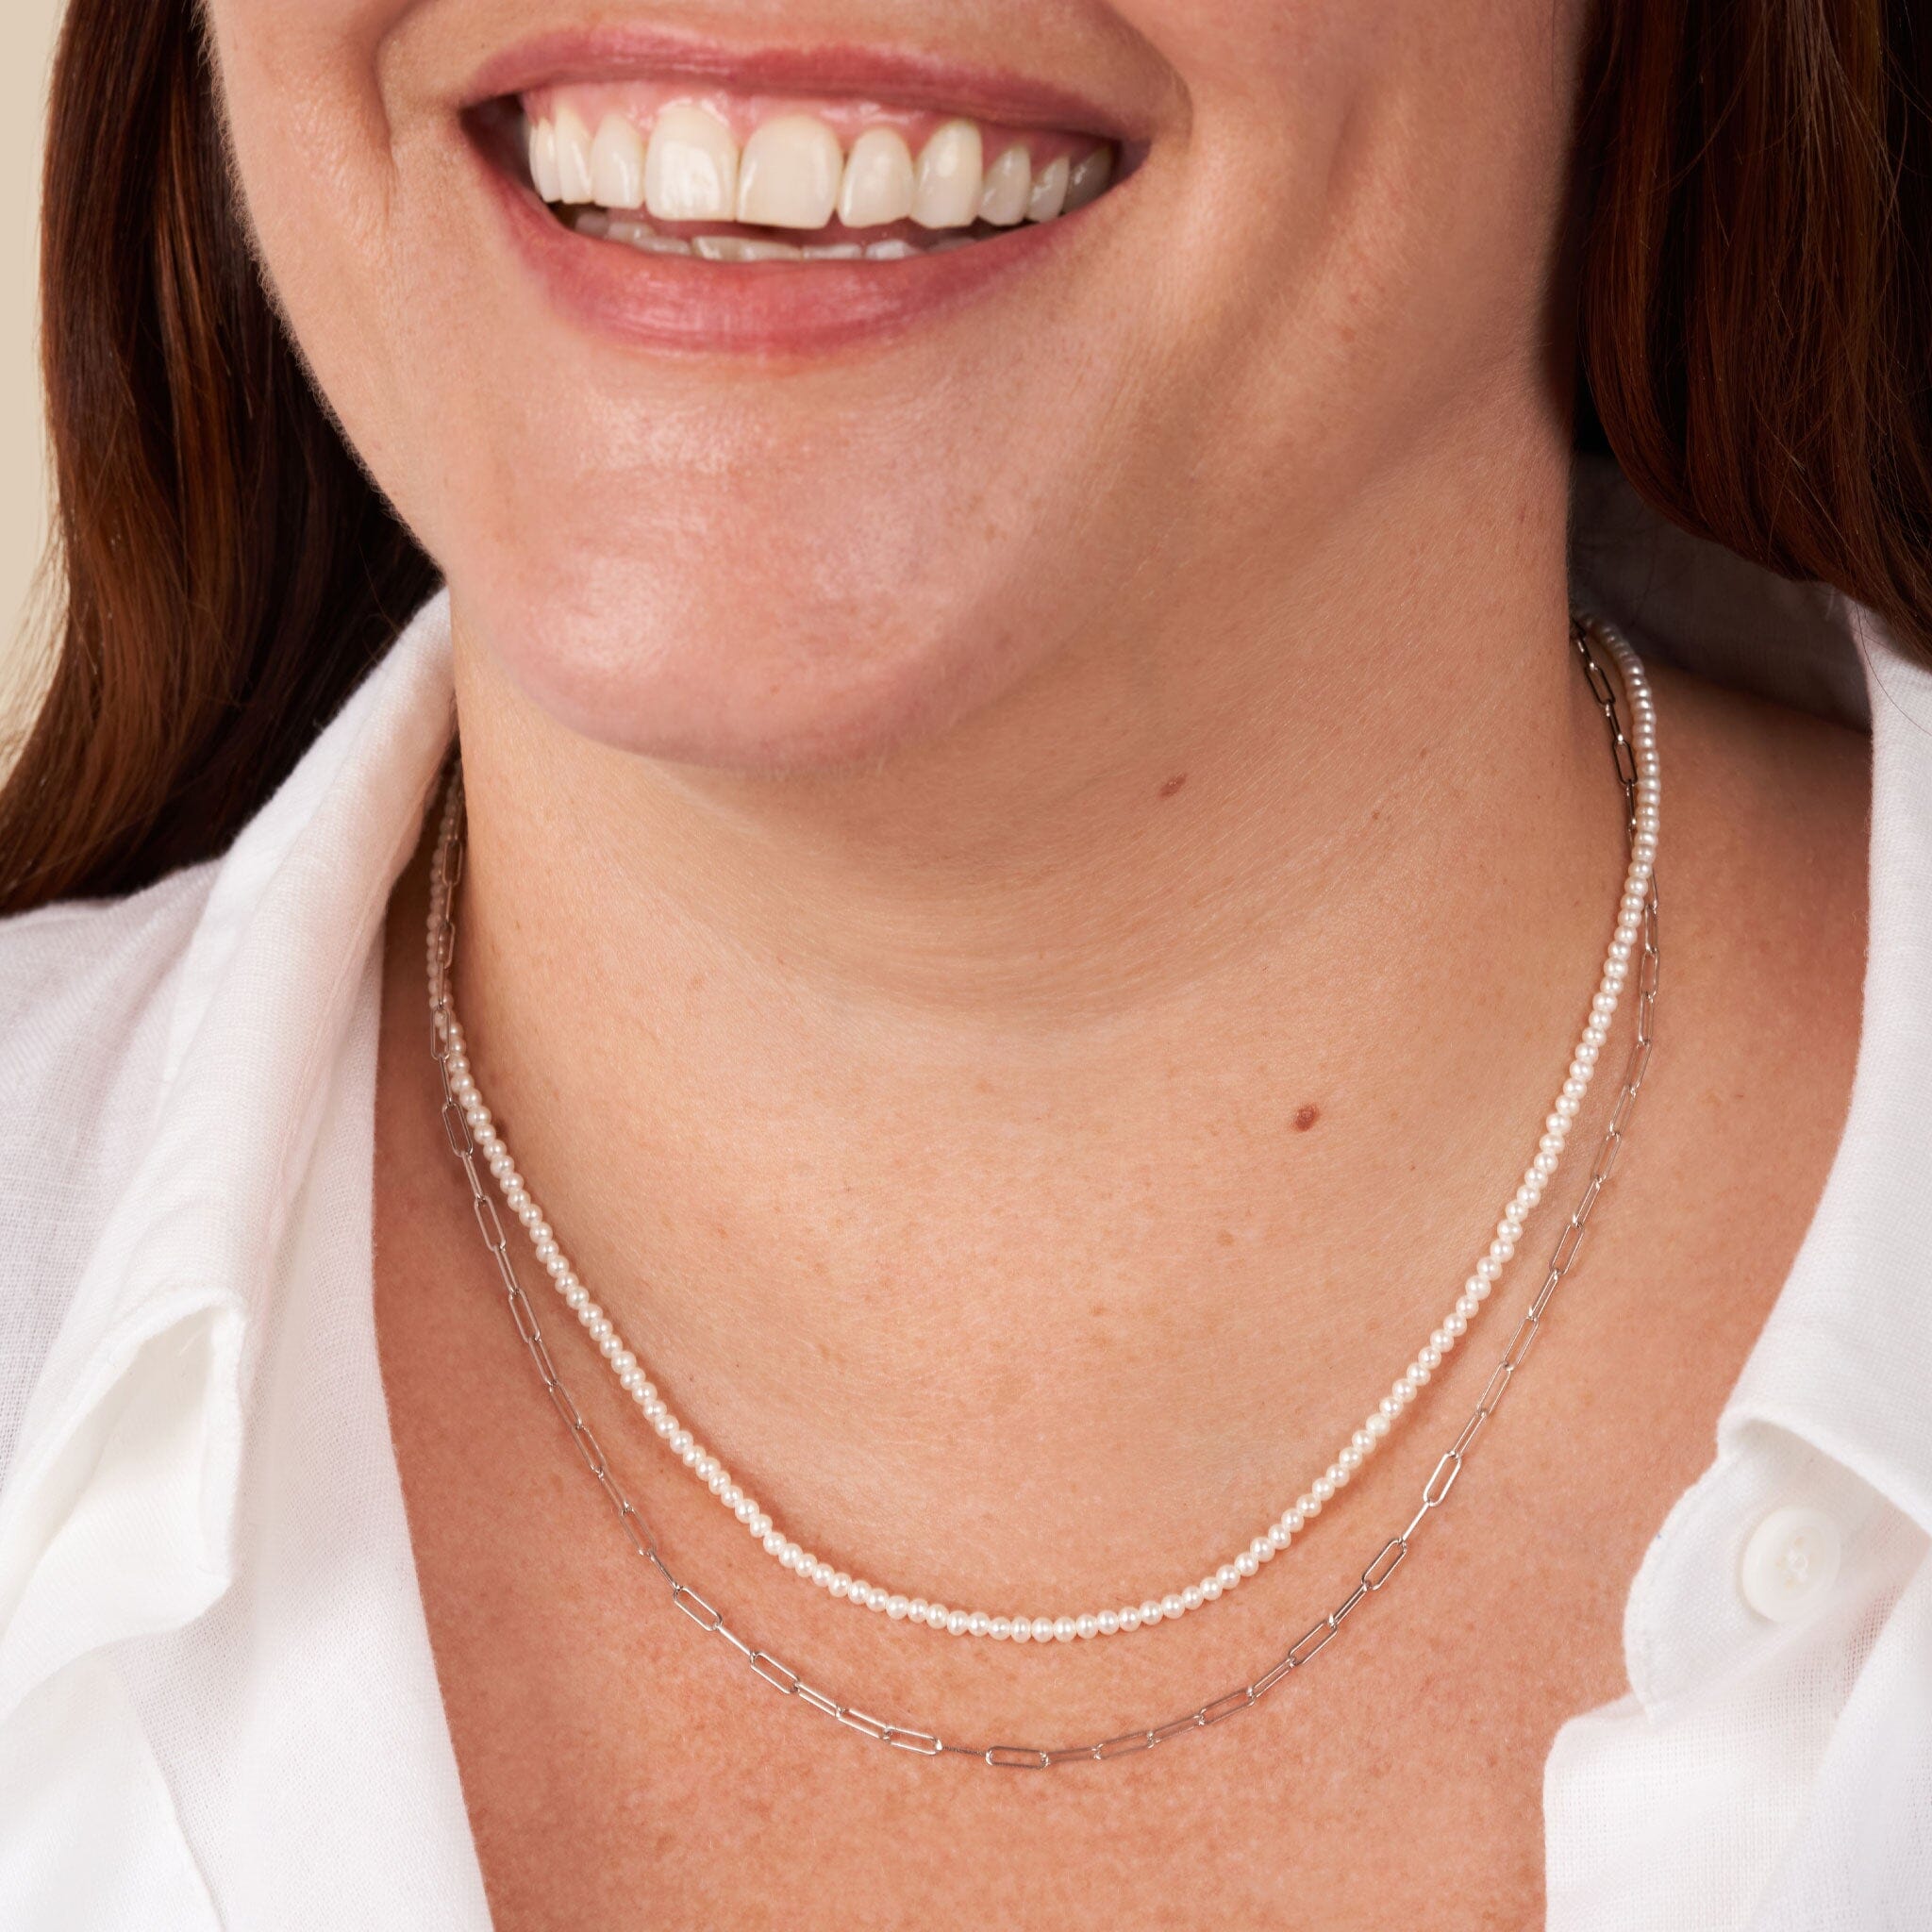 2.5-3.0 mm AAA Freshwater Pearl Necklace with Paperclip Chain Set - White Gold, 18 inch on model